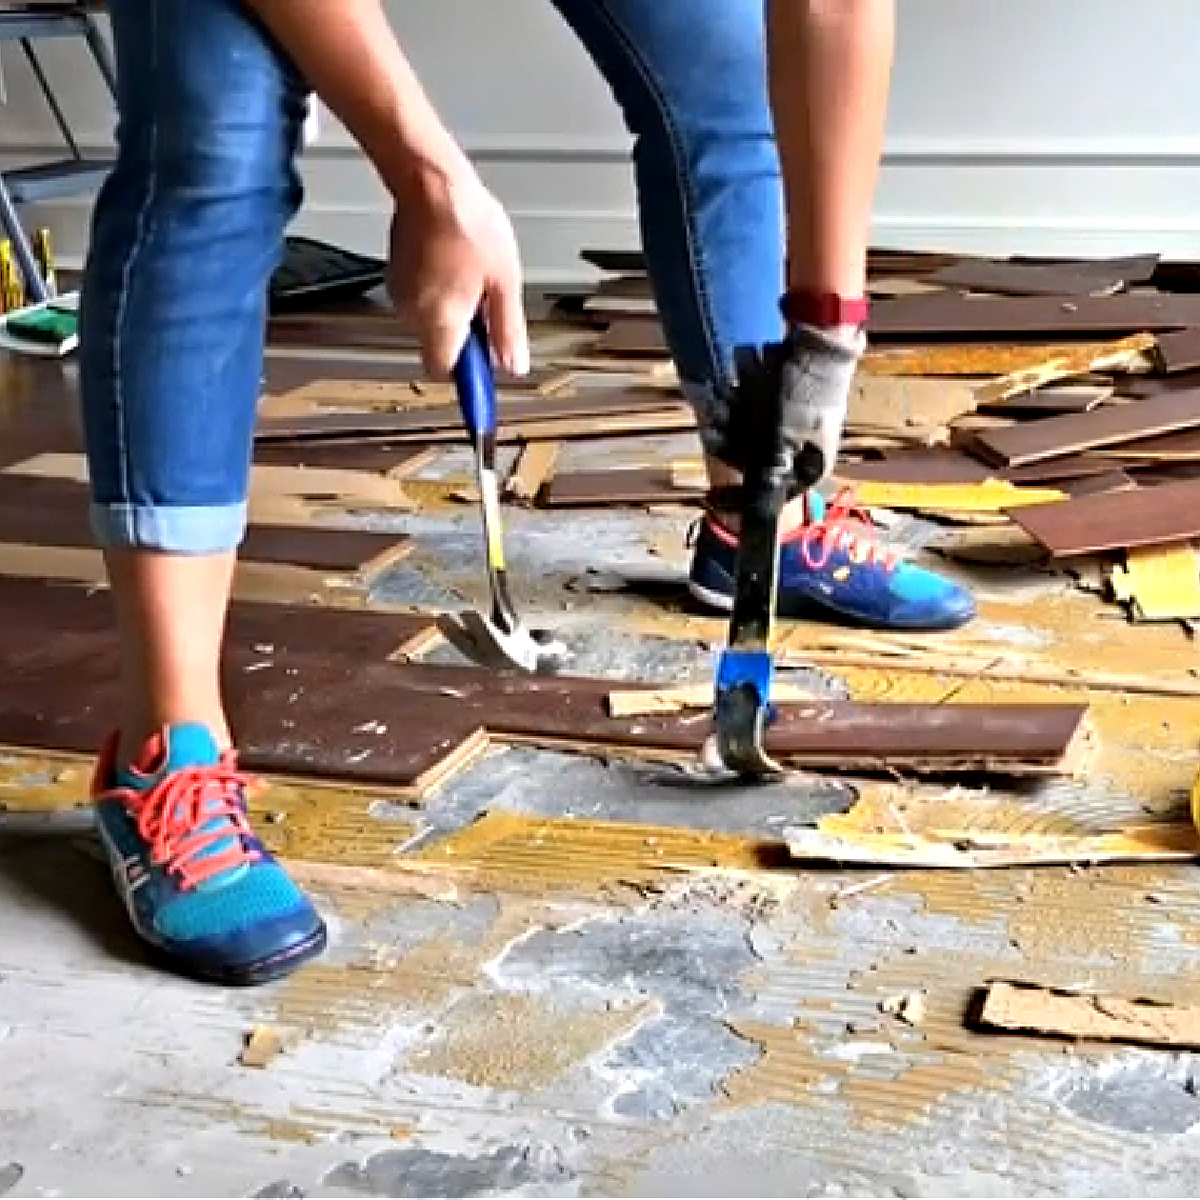 Remove Glued Wood Flooring On Concrete, How To Remove Construction Adhesive From Hardwood Floors